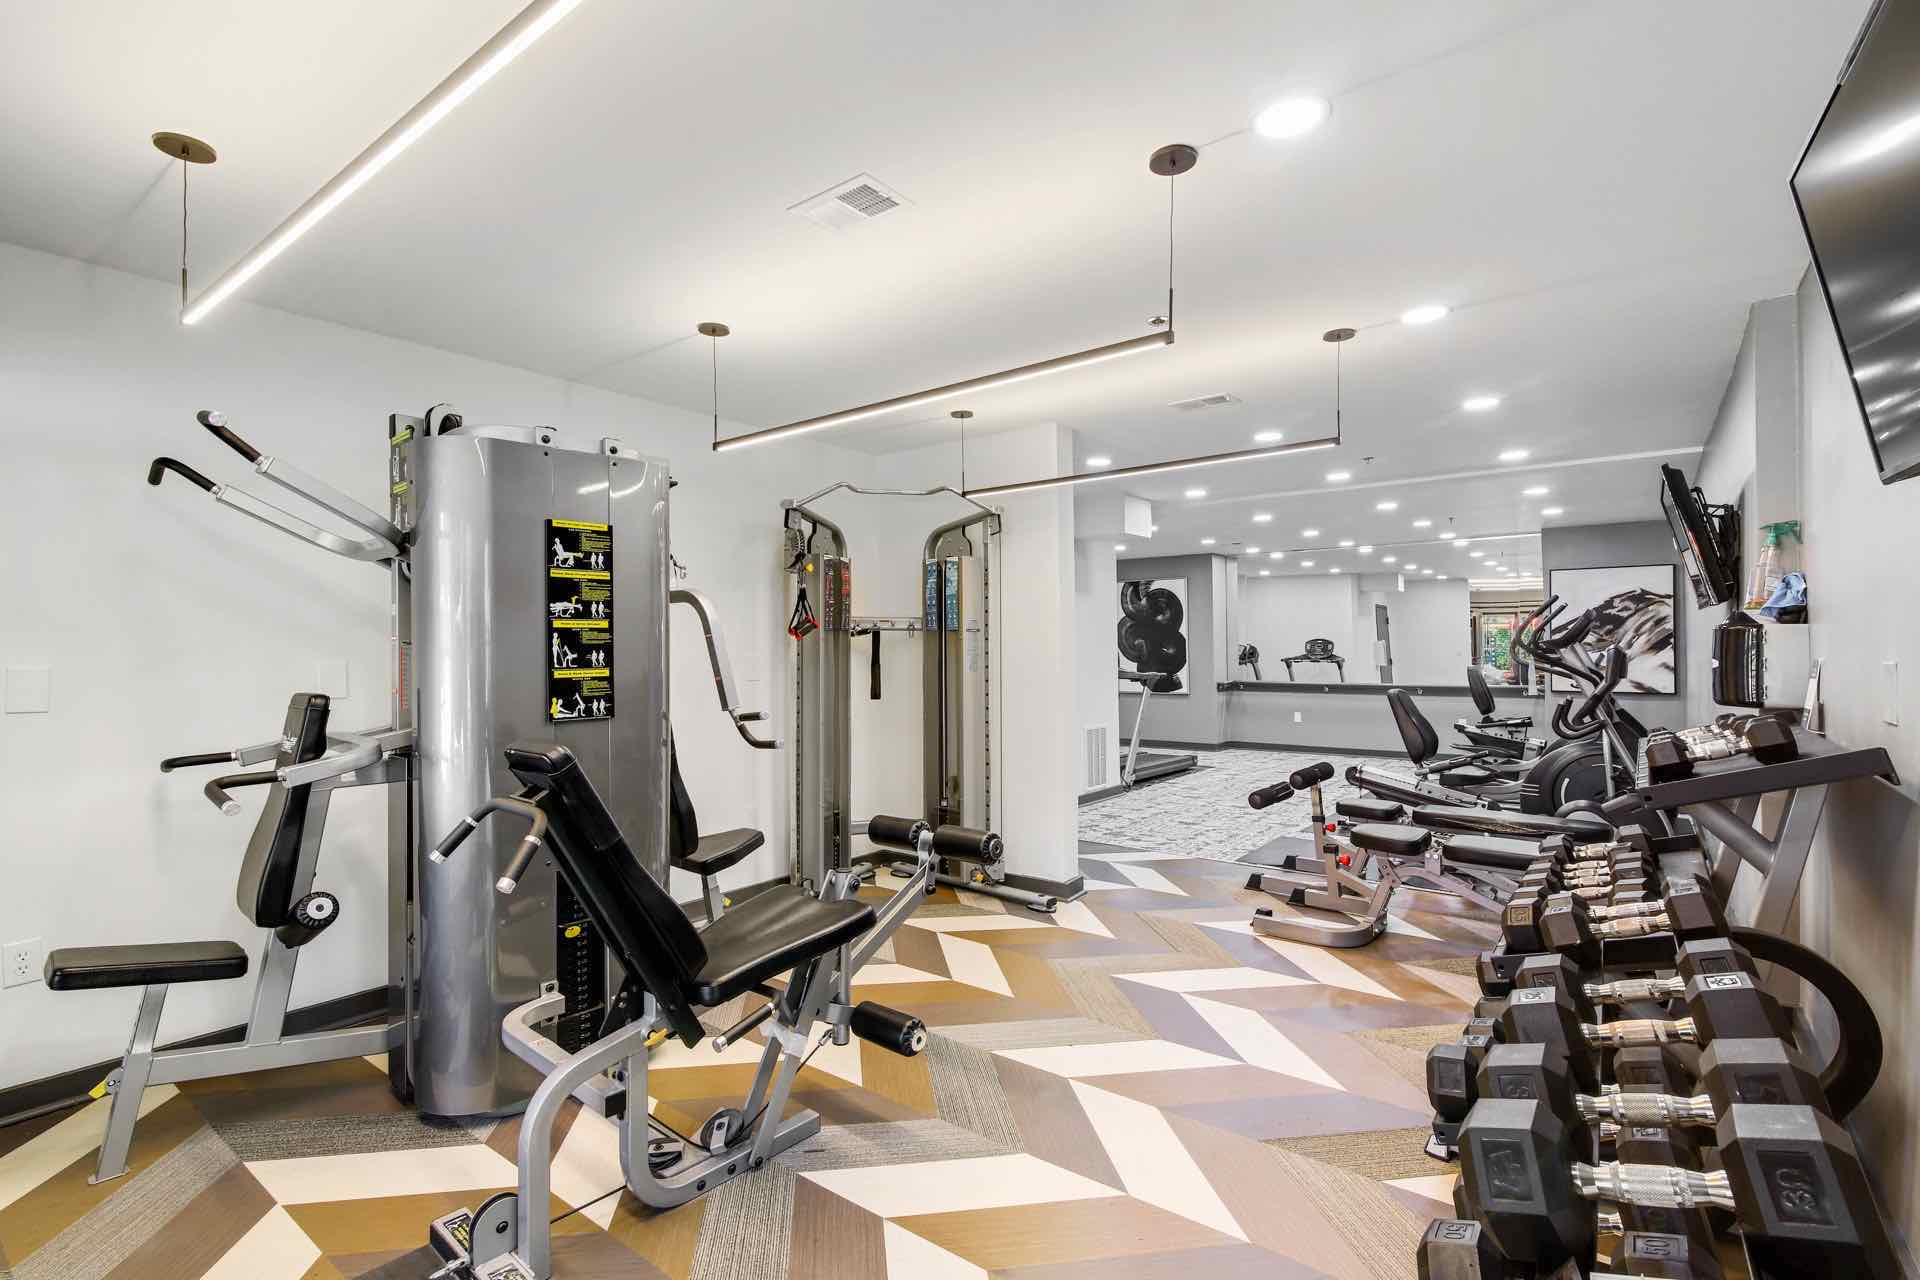 Gym with weight lifting equipment